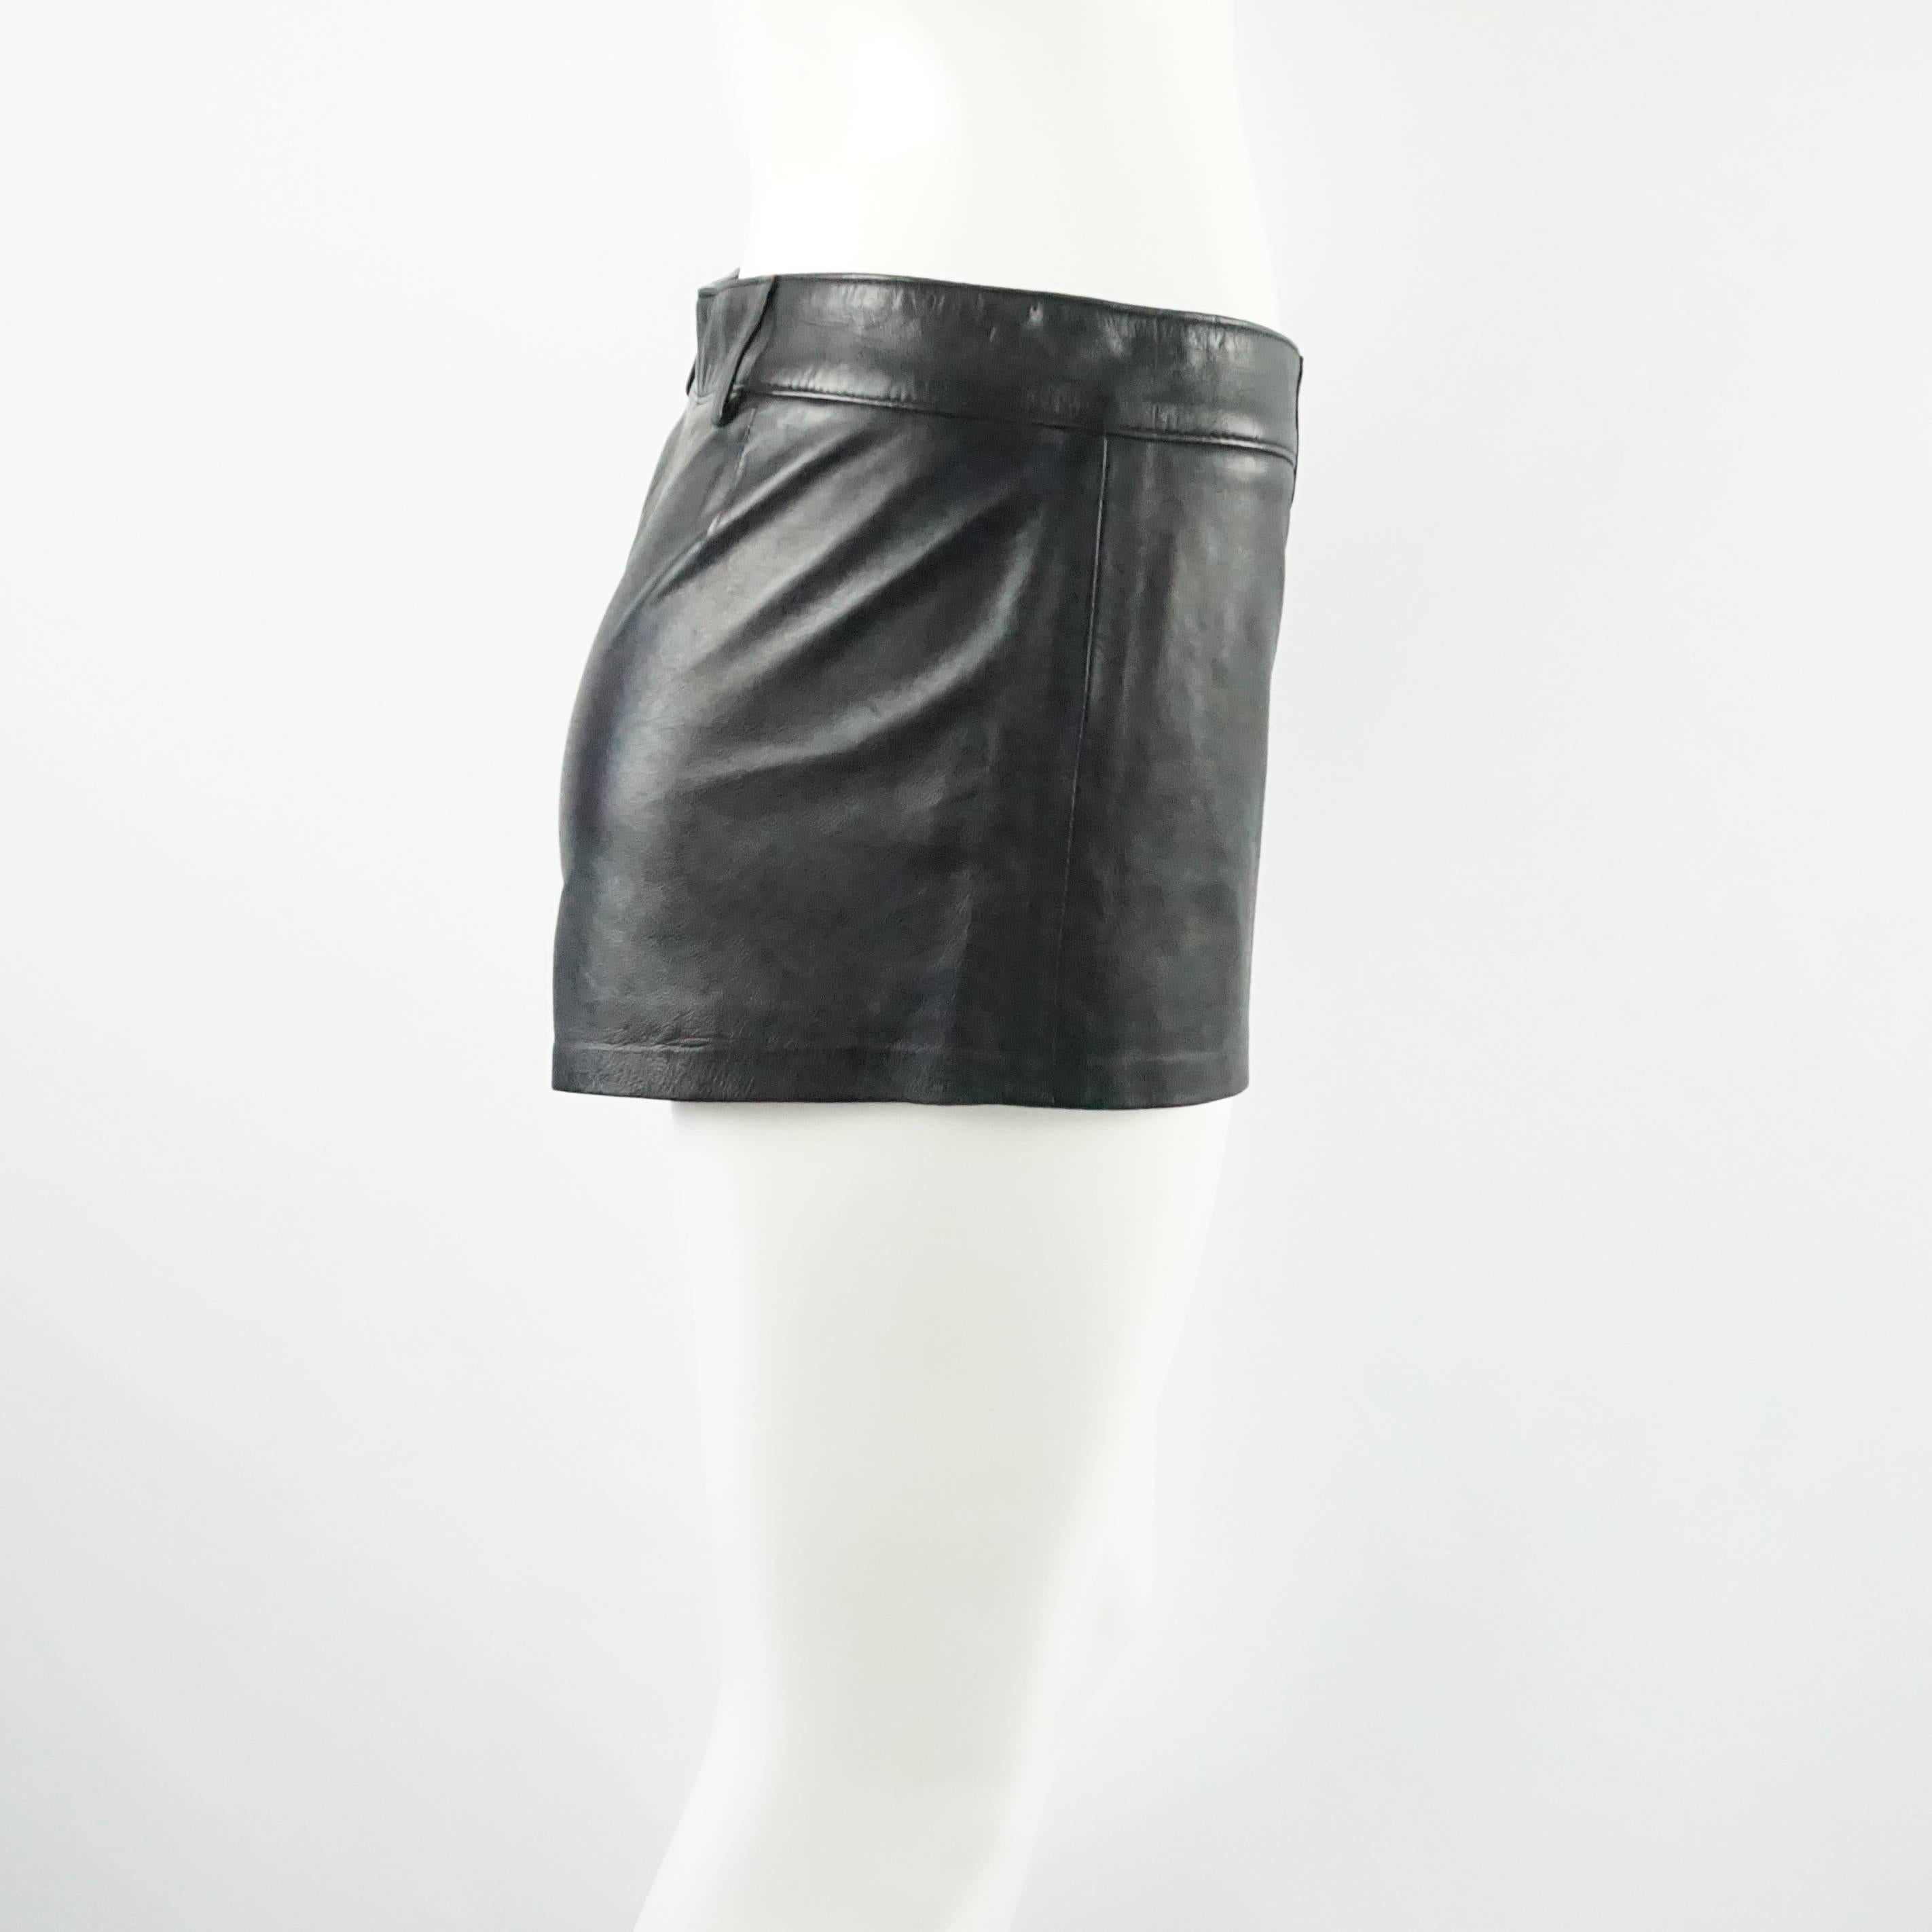 These Ralph Lauren Collection shorts are made of black leather. These shorts have belt loops and no pockets. They are in very good condition with a couple small areas of wear near the top of the shorts by the belt loops.

Measurements
Waist: